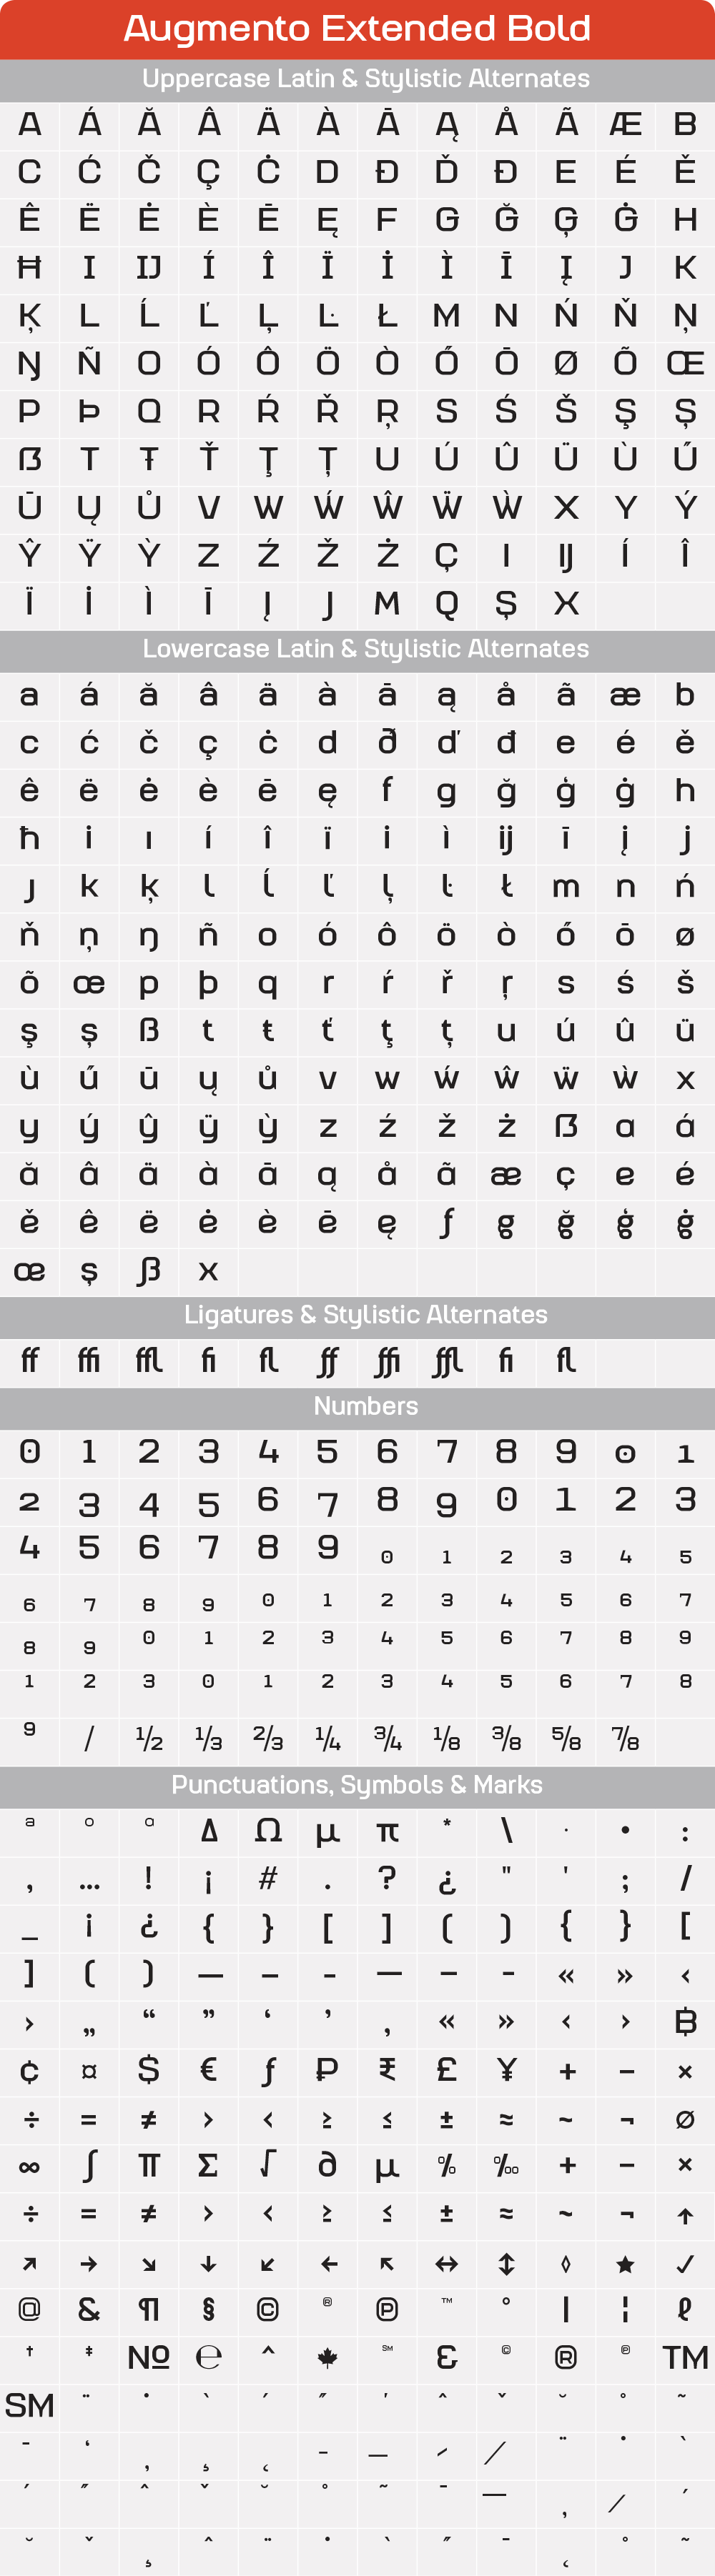 Extended BoldAugmento-GlyphTable.png